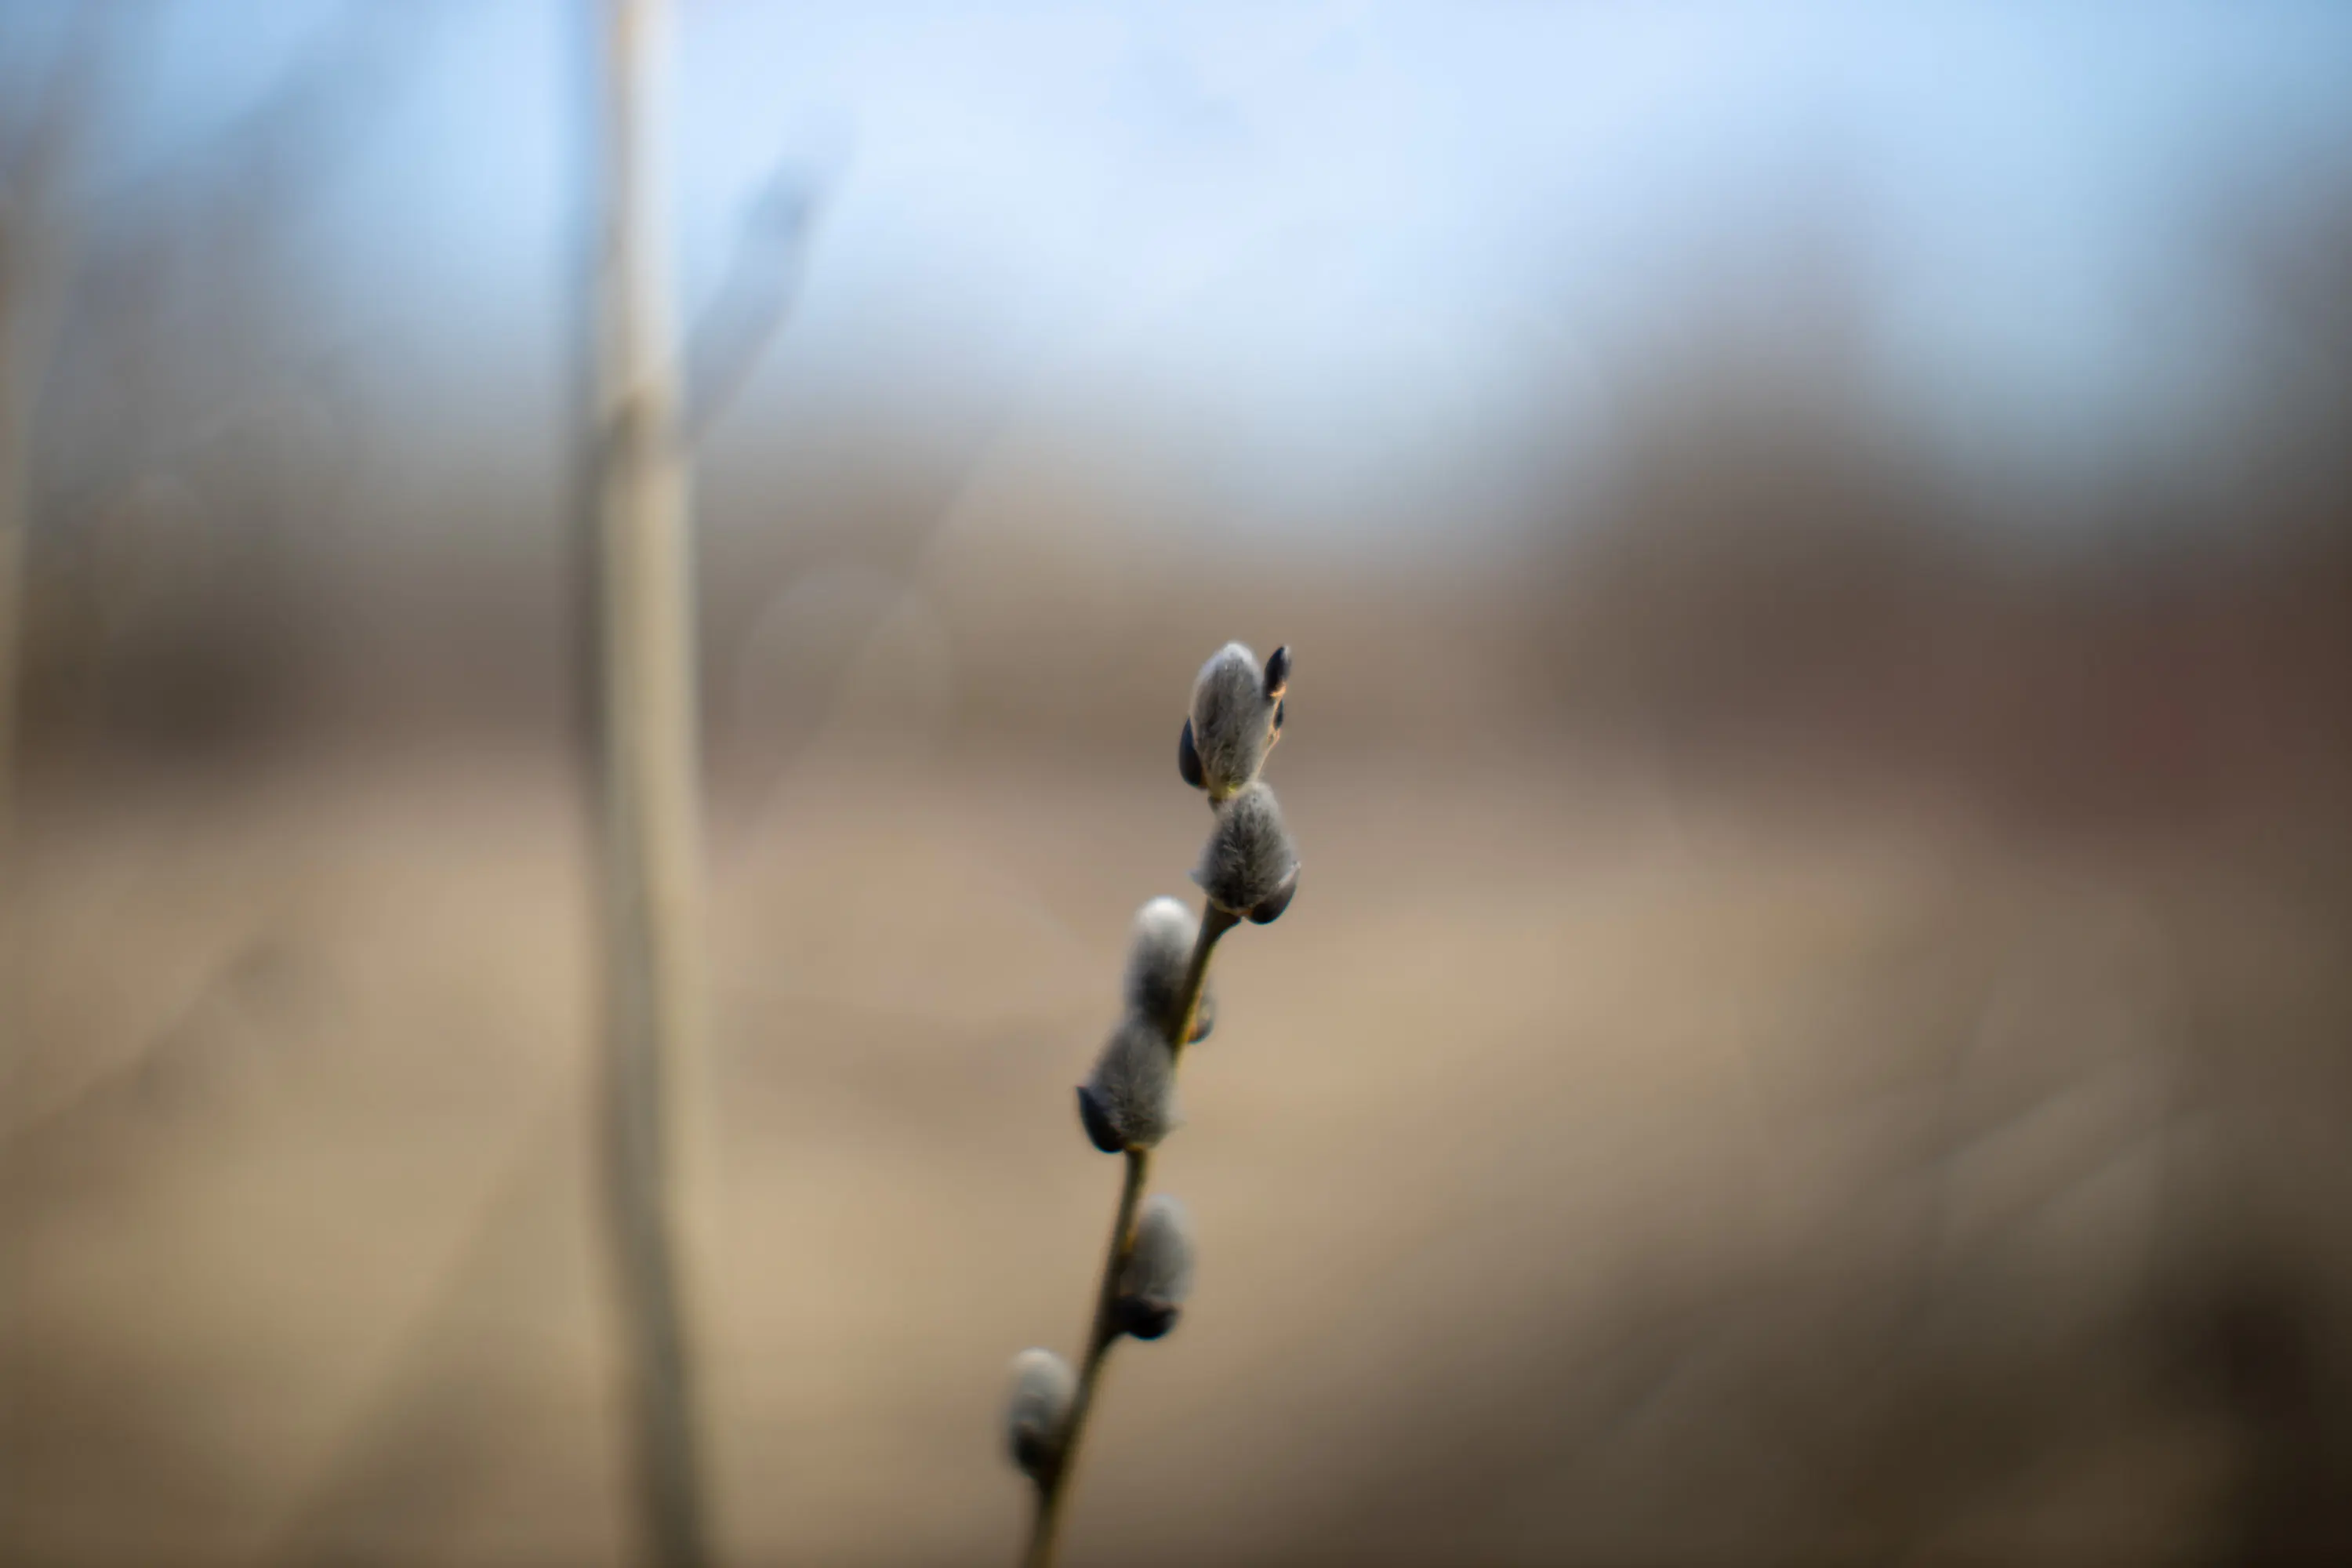 Buds on the twig - Shot at f1.2